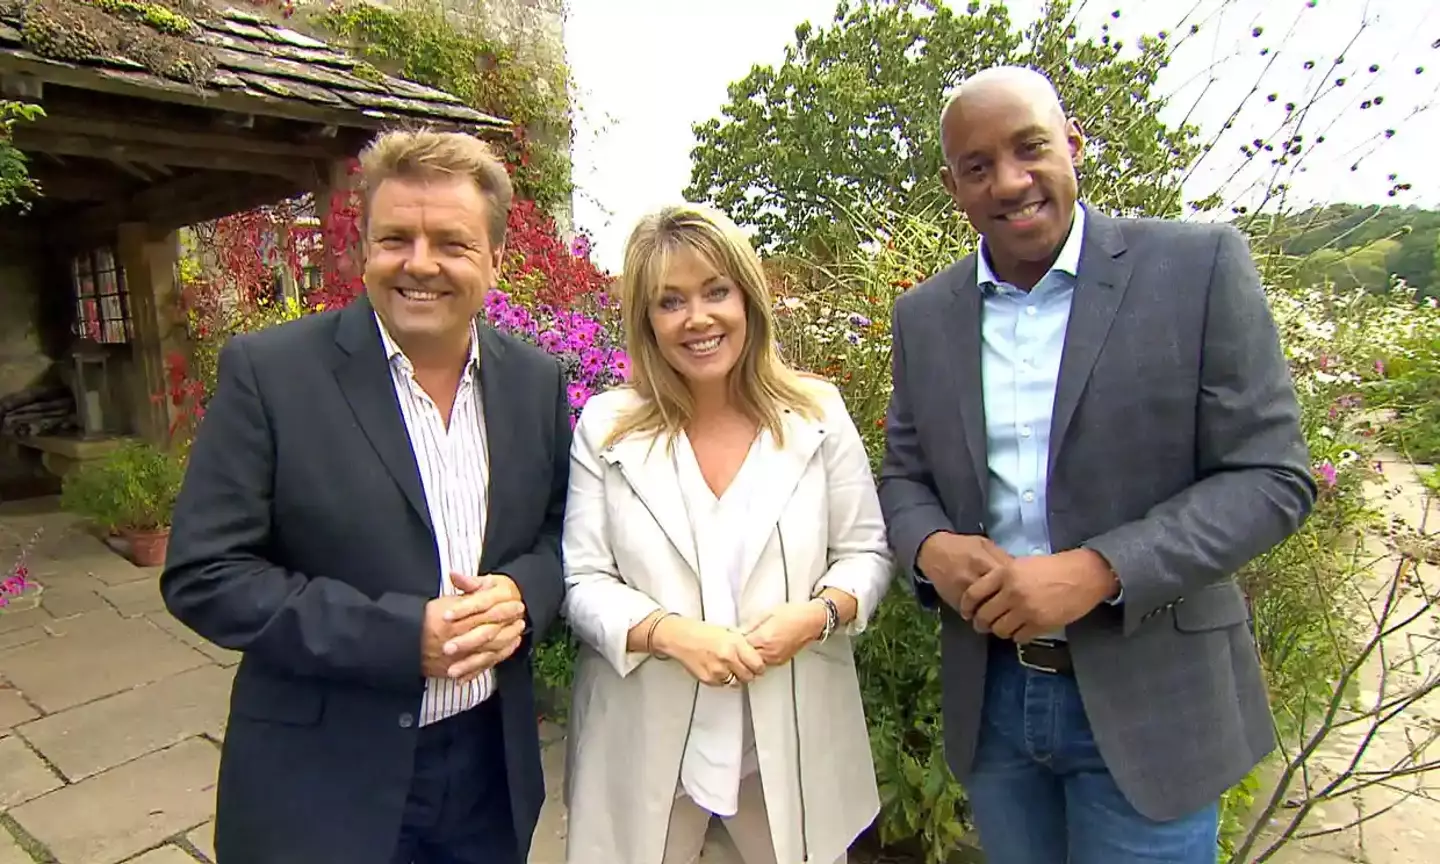 Martin Roberts has taken part in a much less wholesome reality series.